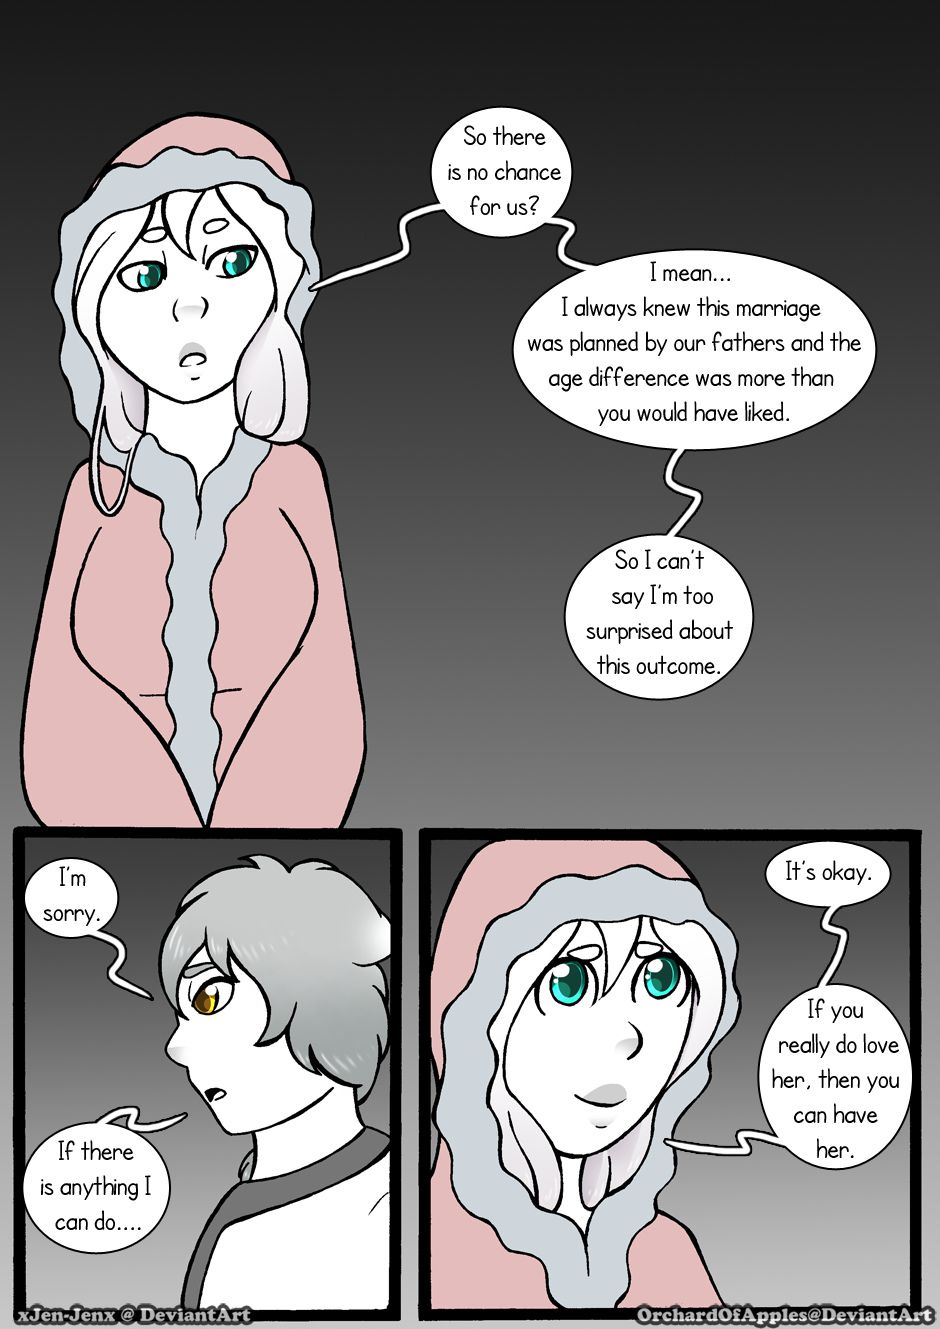 [Jeny-jen94] Between Kings and Queens [Ongoing] 240